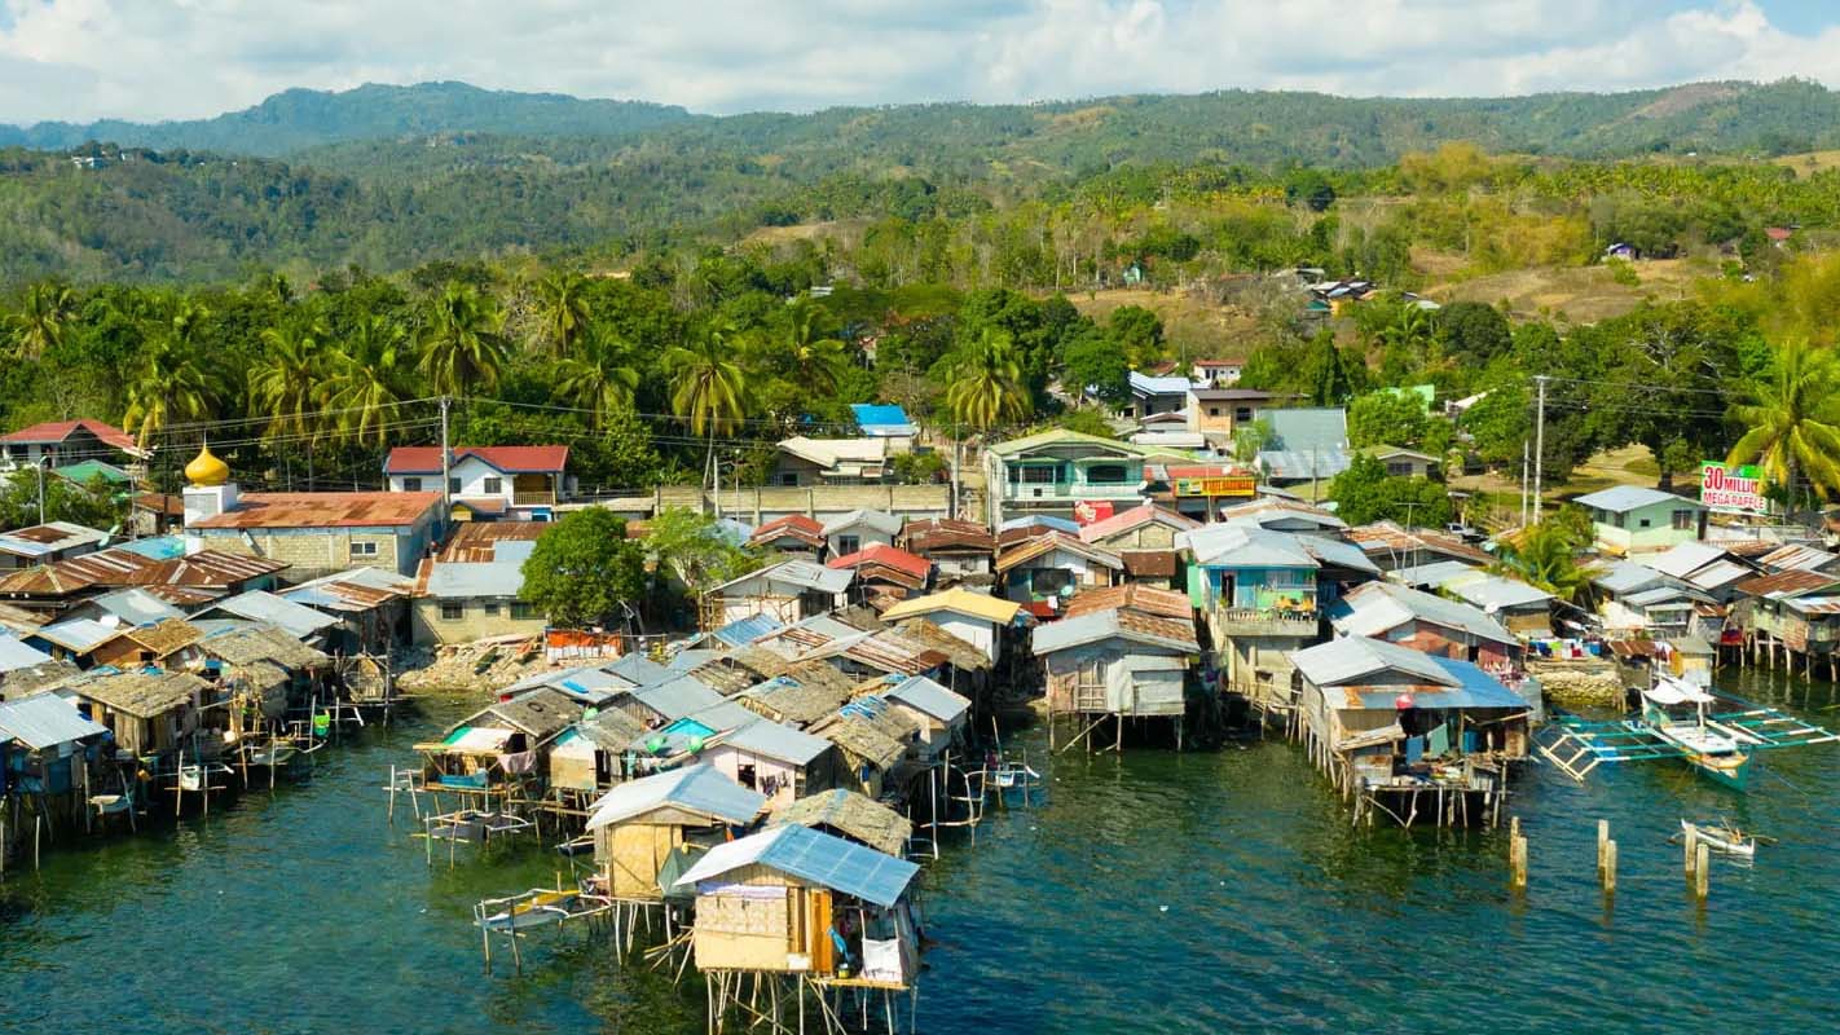 Wooden houses built on the river in a low socio-economic neighbourhood in an Asian city